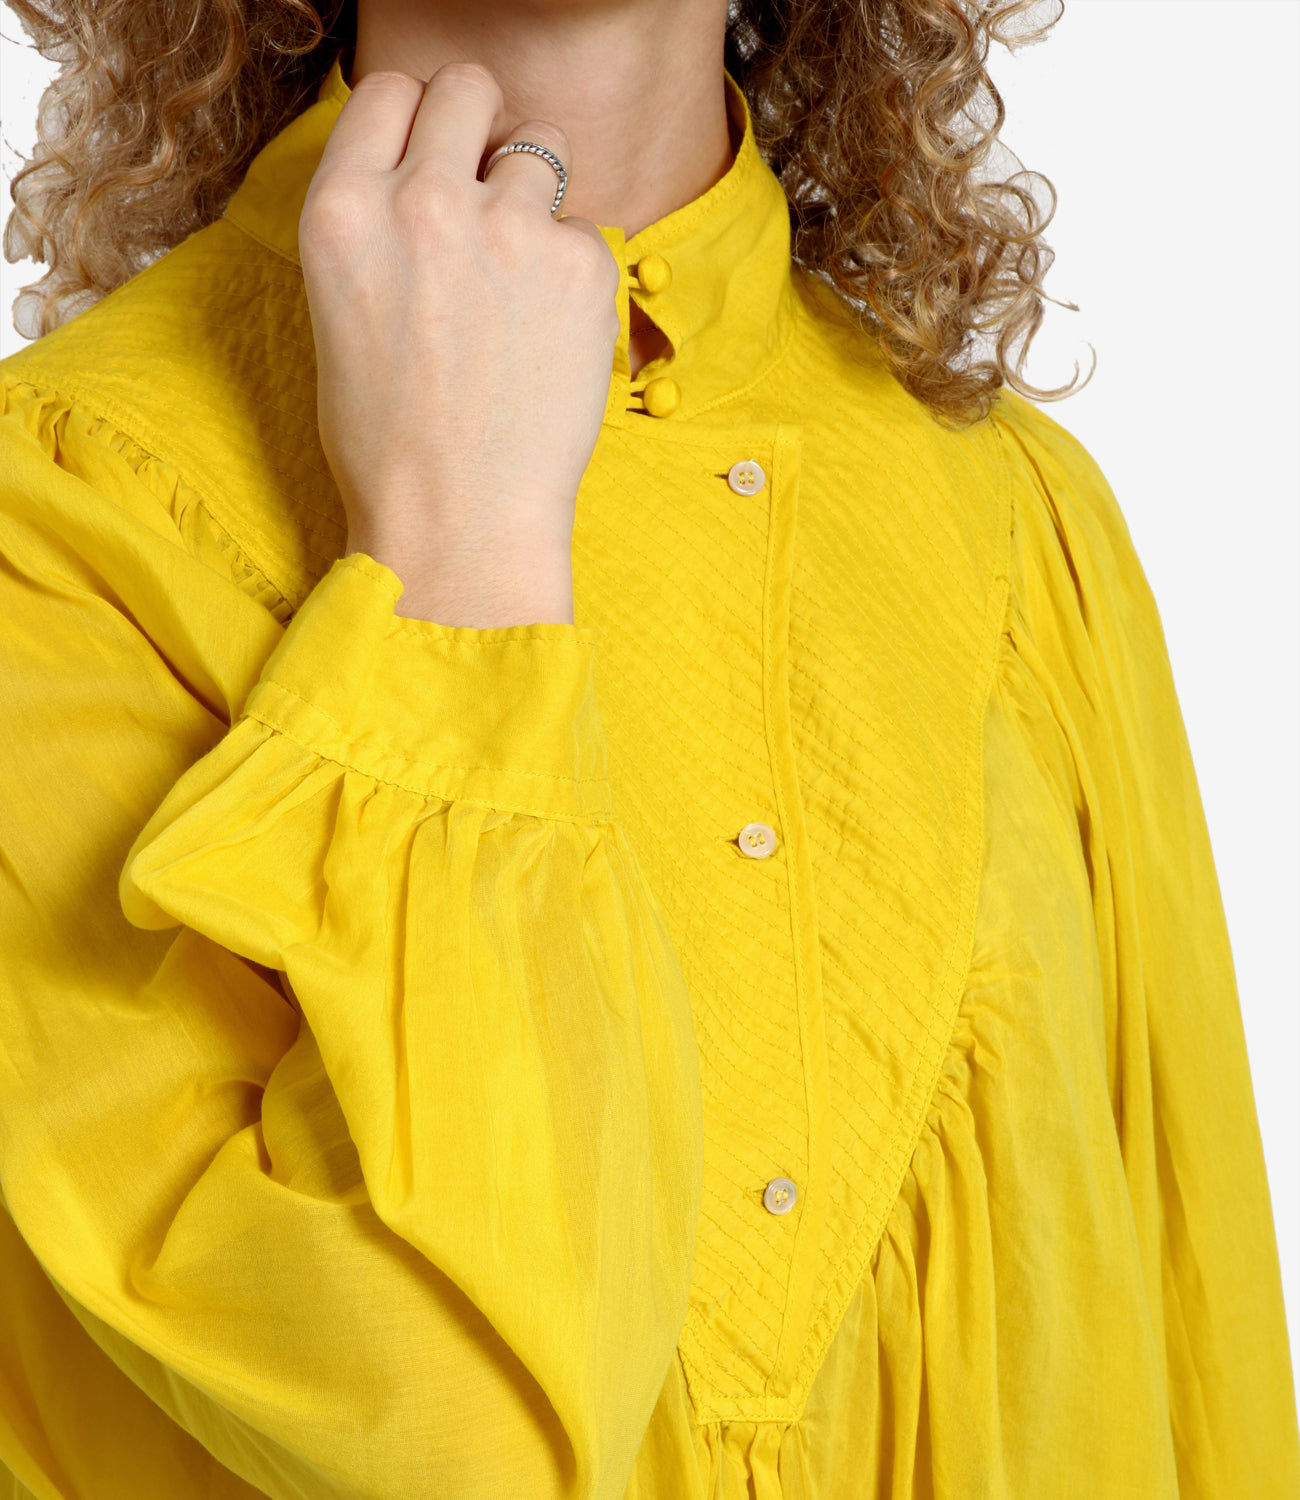 strong_strong | Yellow Blouse